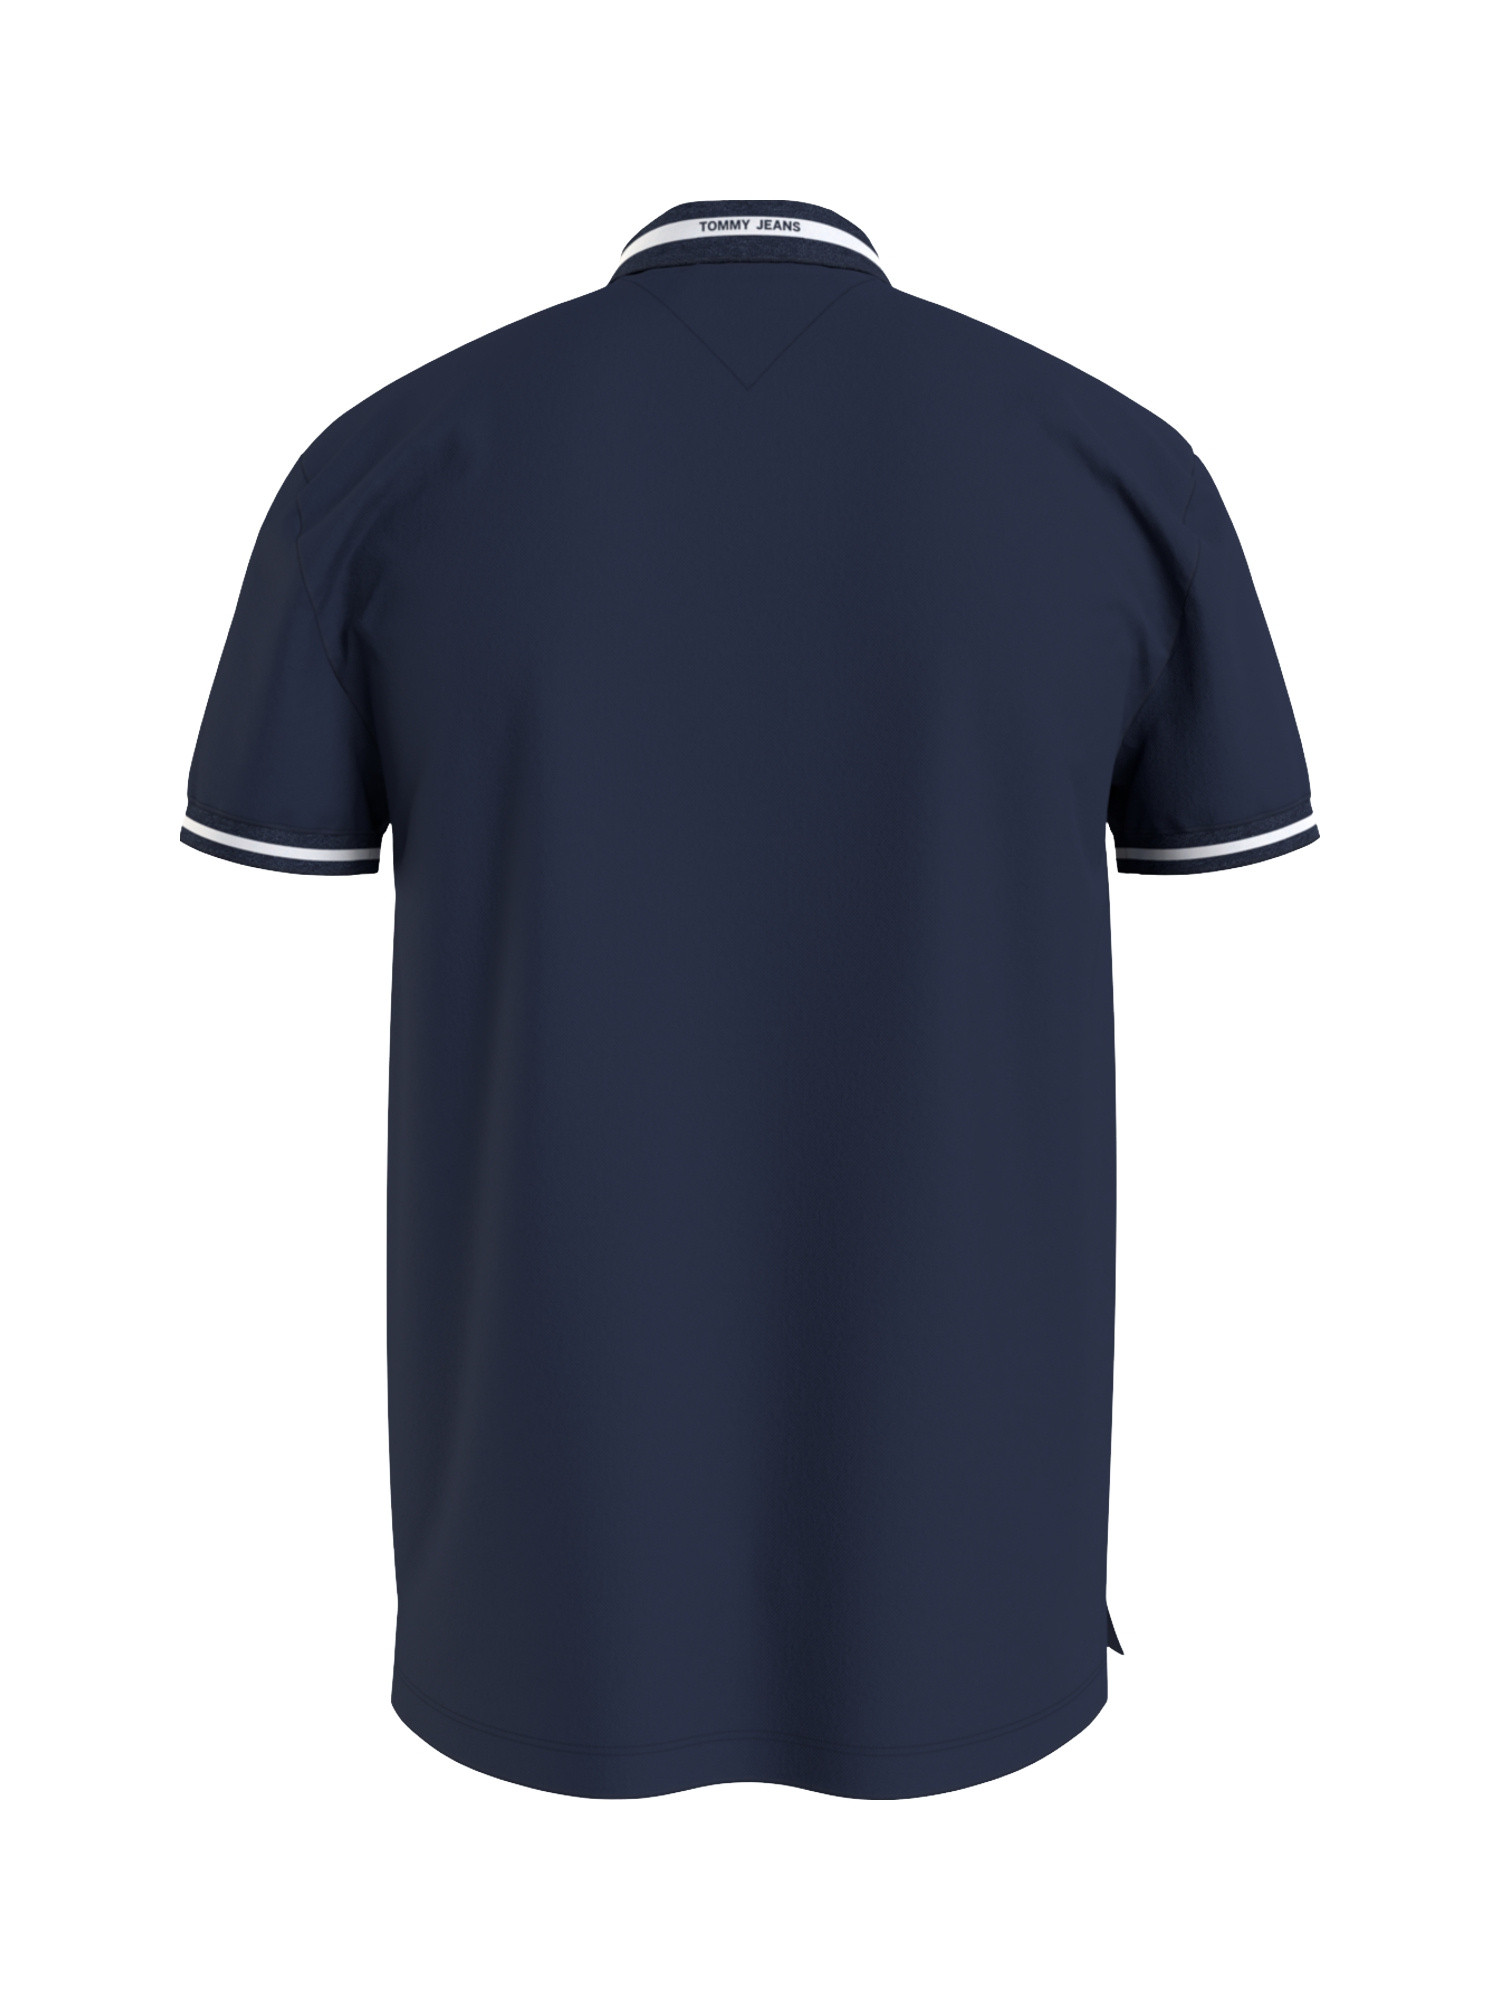 Polo stretch, Blu, large image number 1